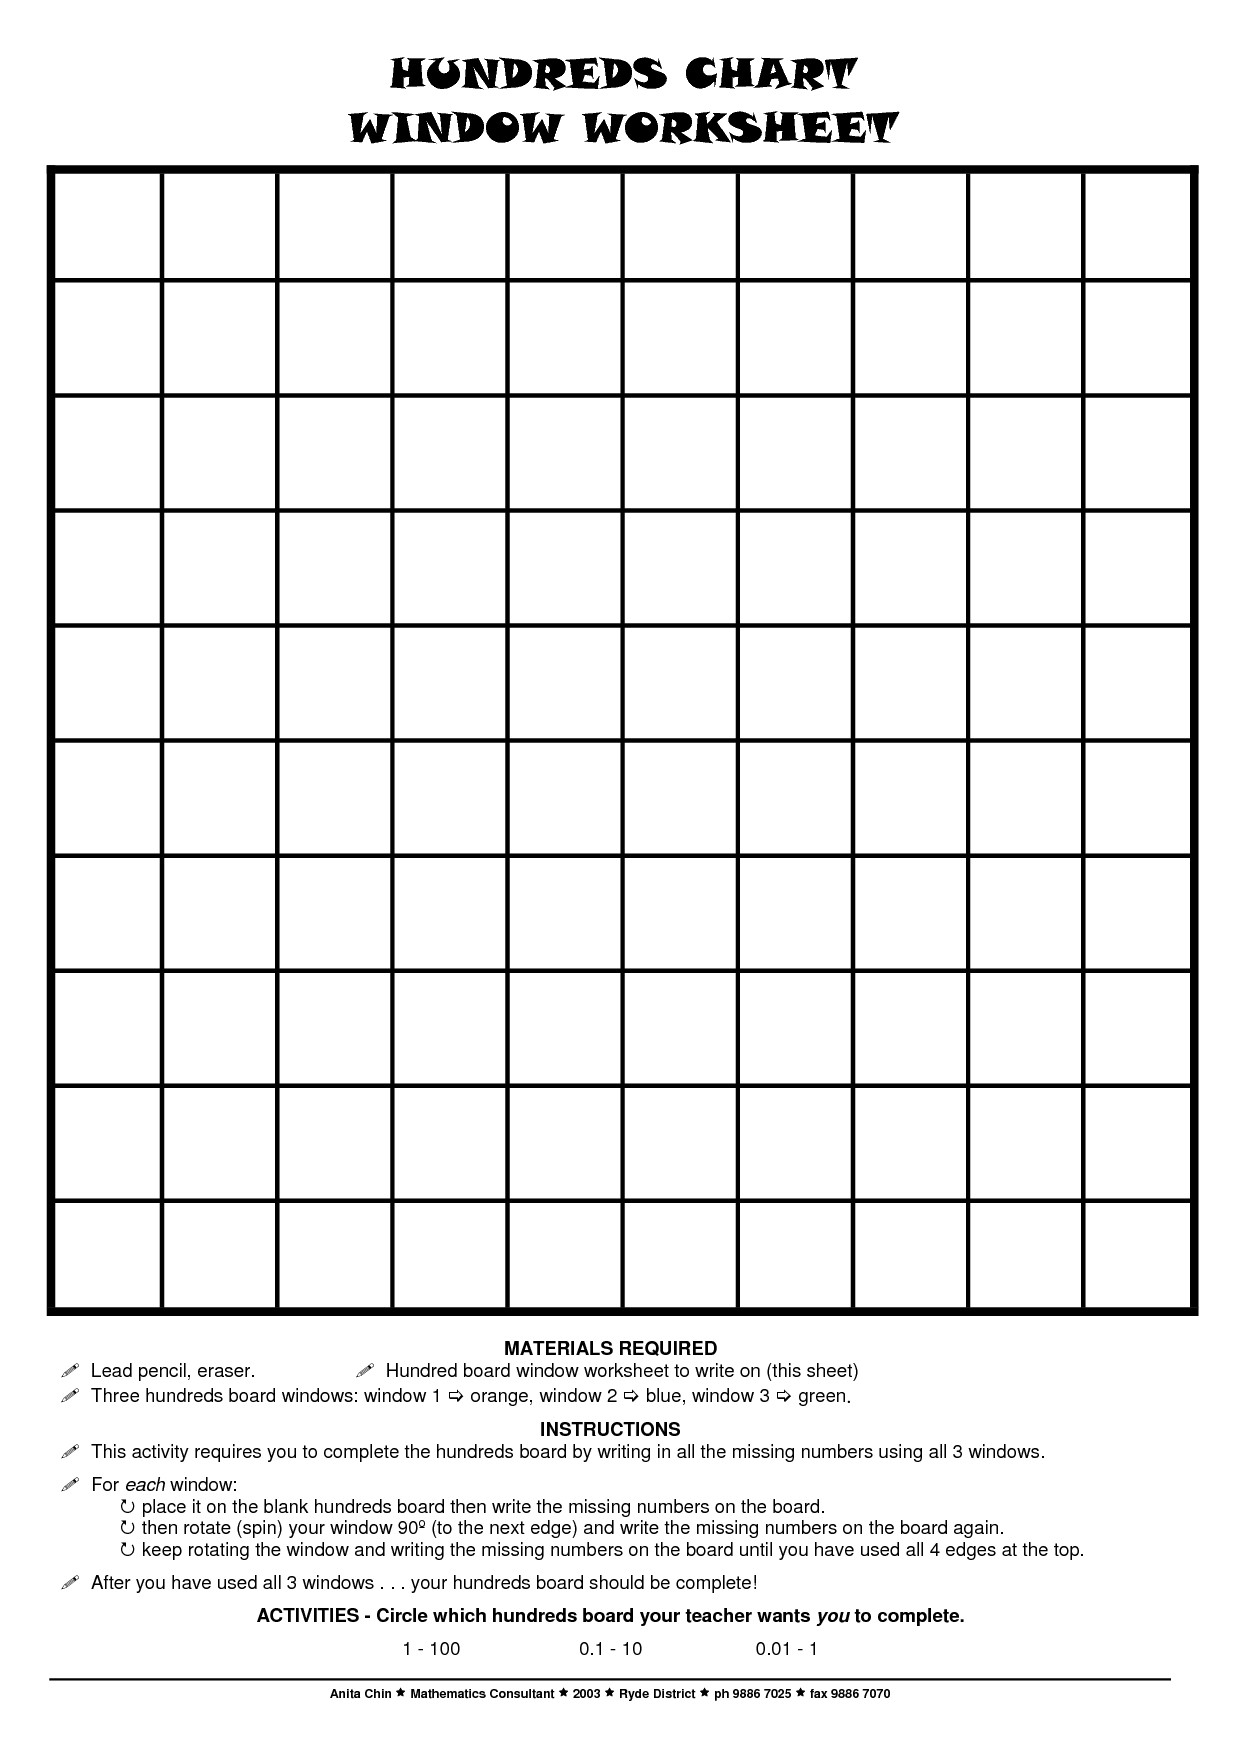 Hundreds Chart with Missing Numbers Worksheets Image